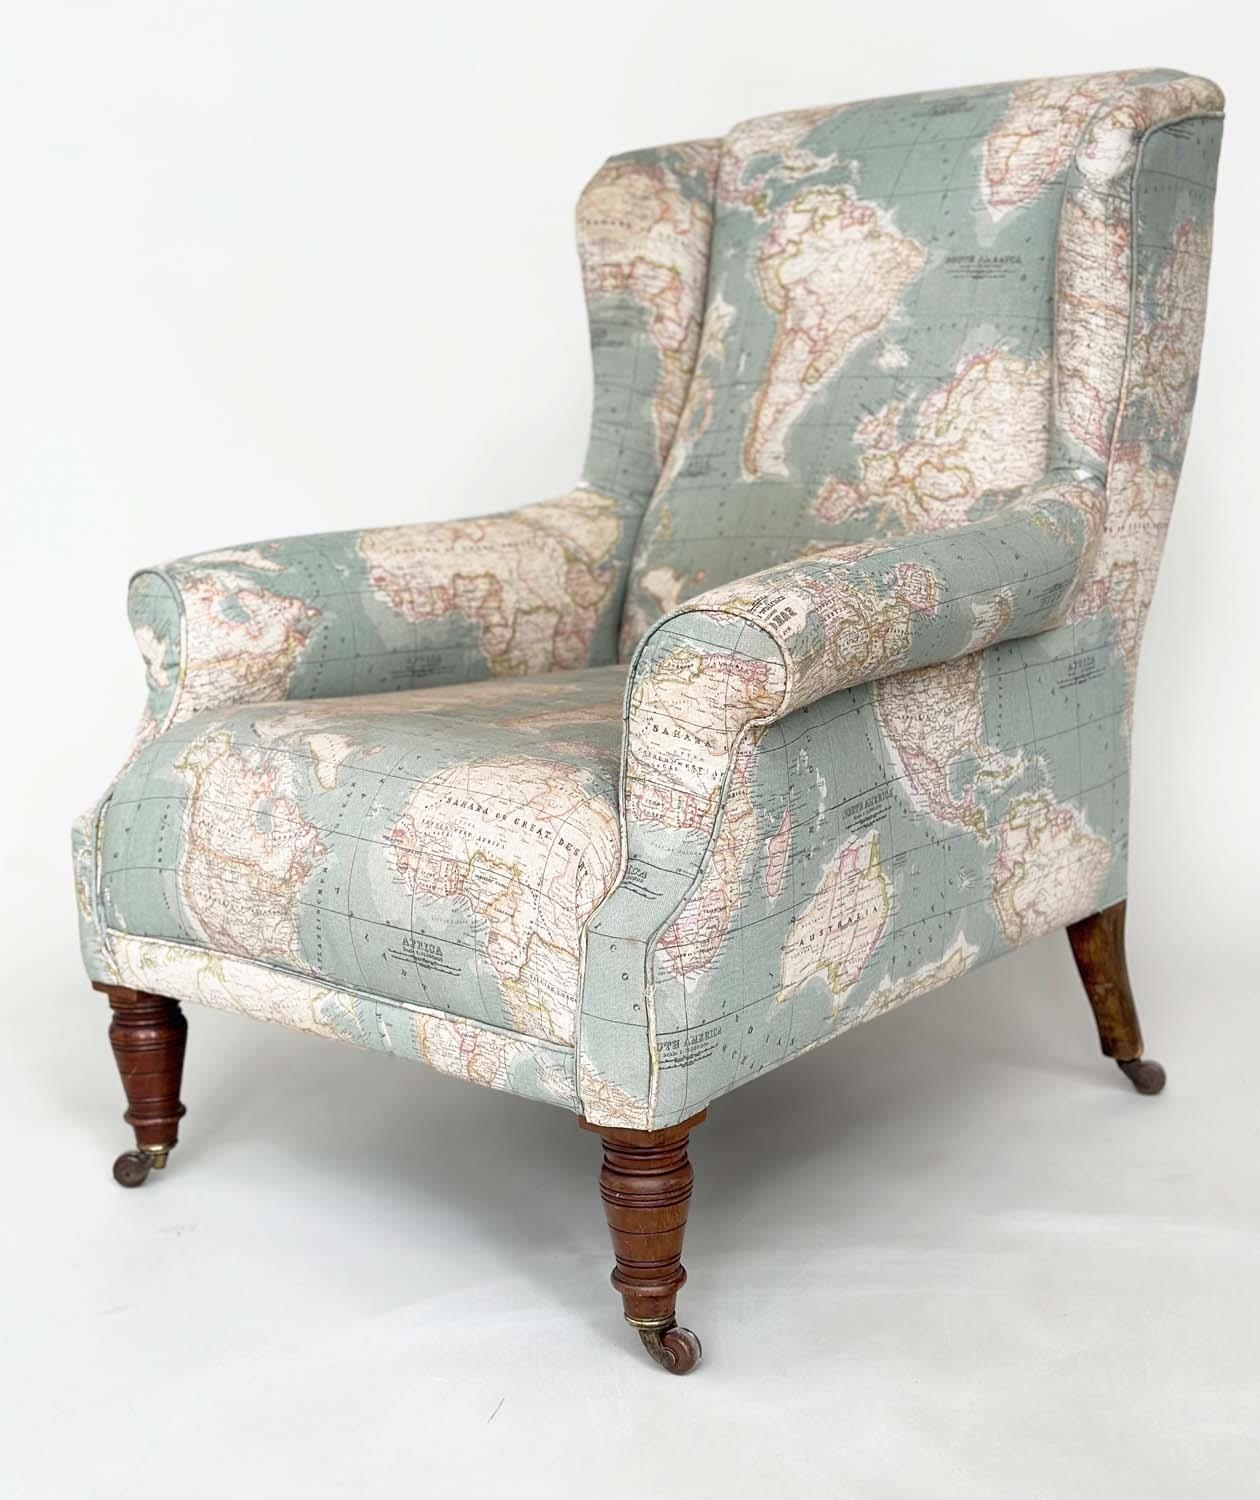 WING ARMCHAIR, Victorian walnut with circa 1900 World Atlas printed fabric upholstery scroll arms - Image 3 of 12